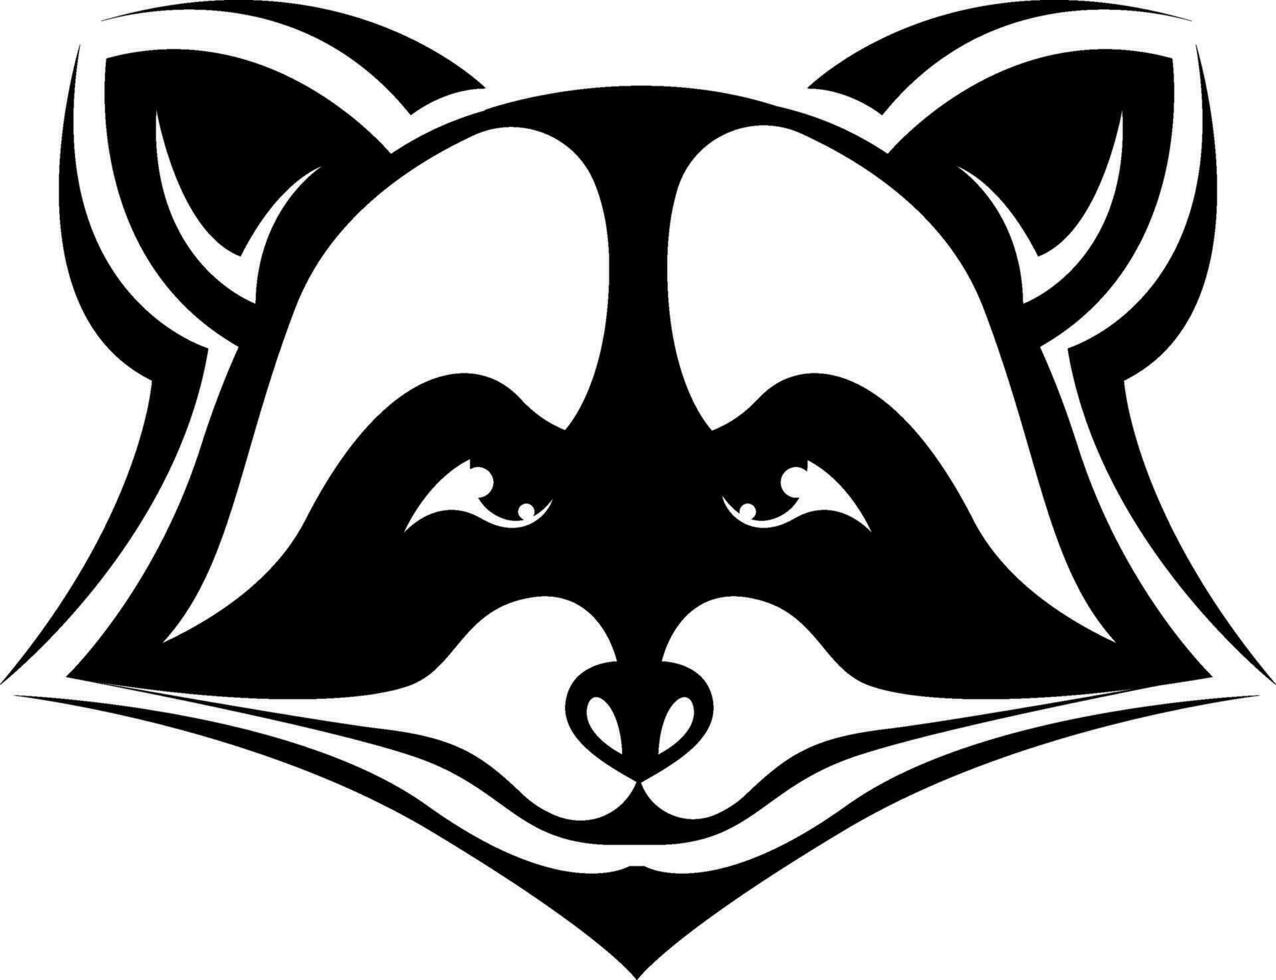 Racoon head tattoo, tattoo illustration, vector on a white background.